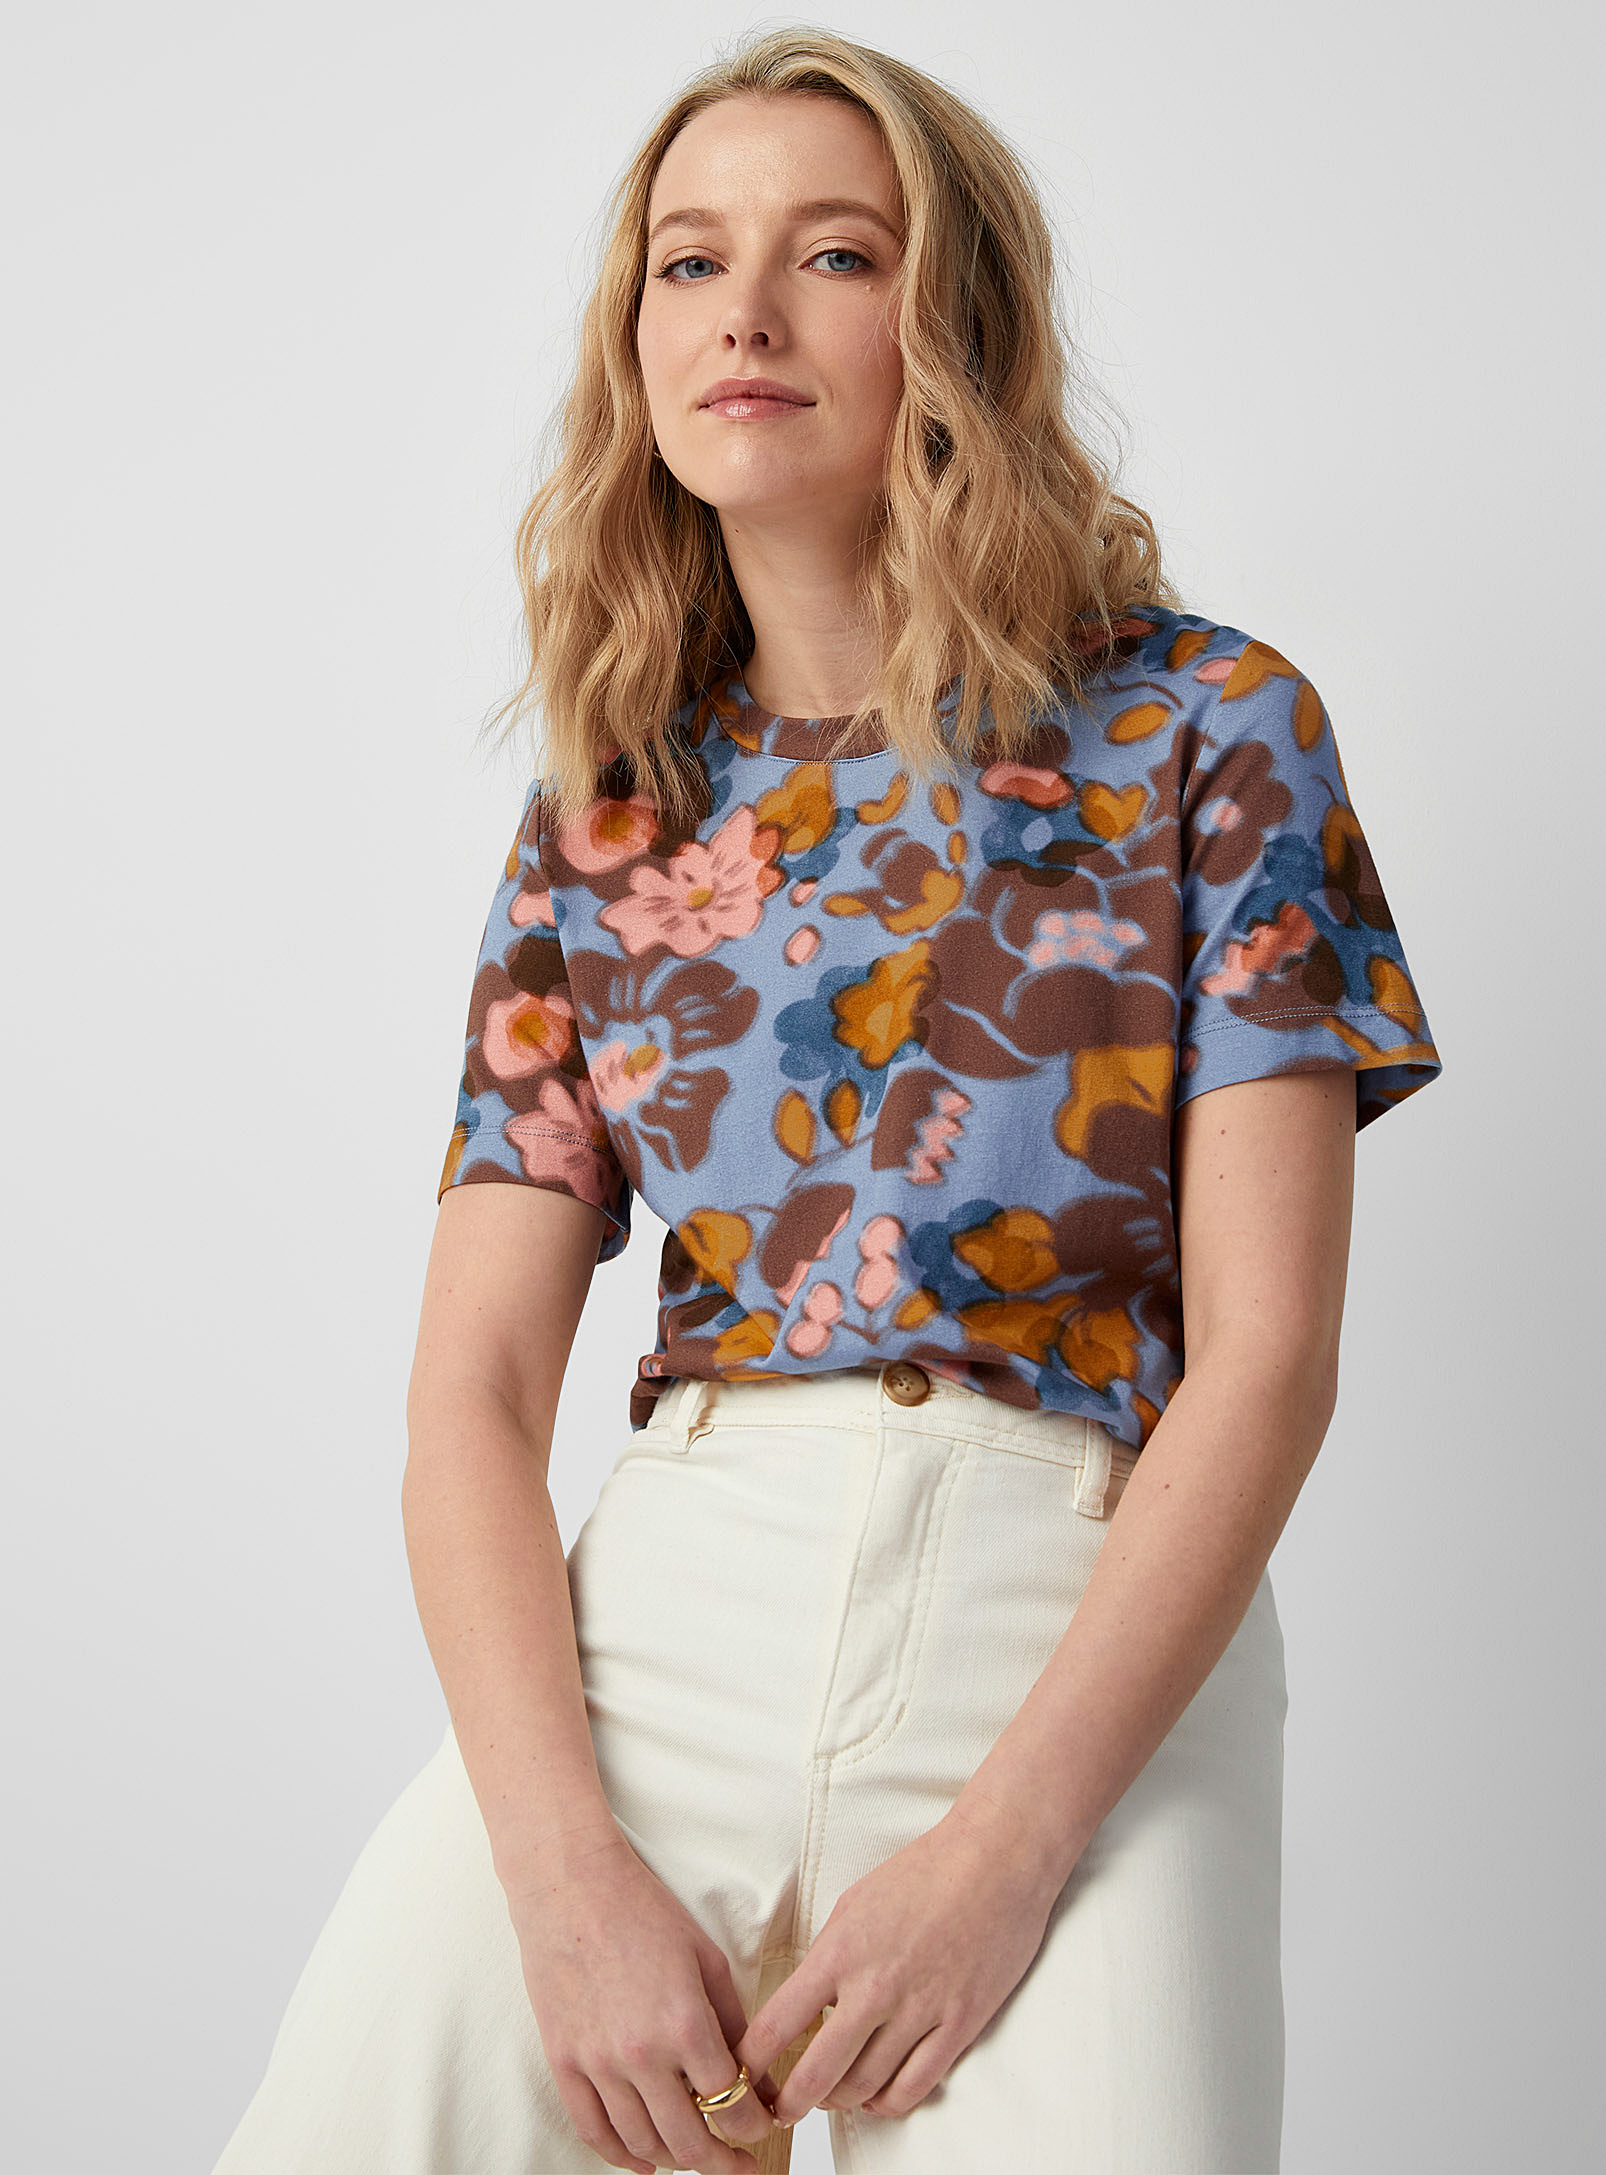 Contemporaine Lush Garden T-shirt Made With Liberty Fabric In Patterned Blue